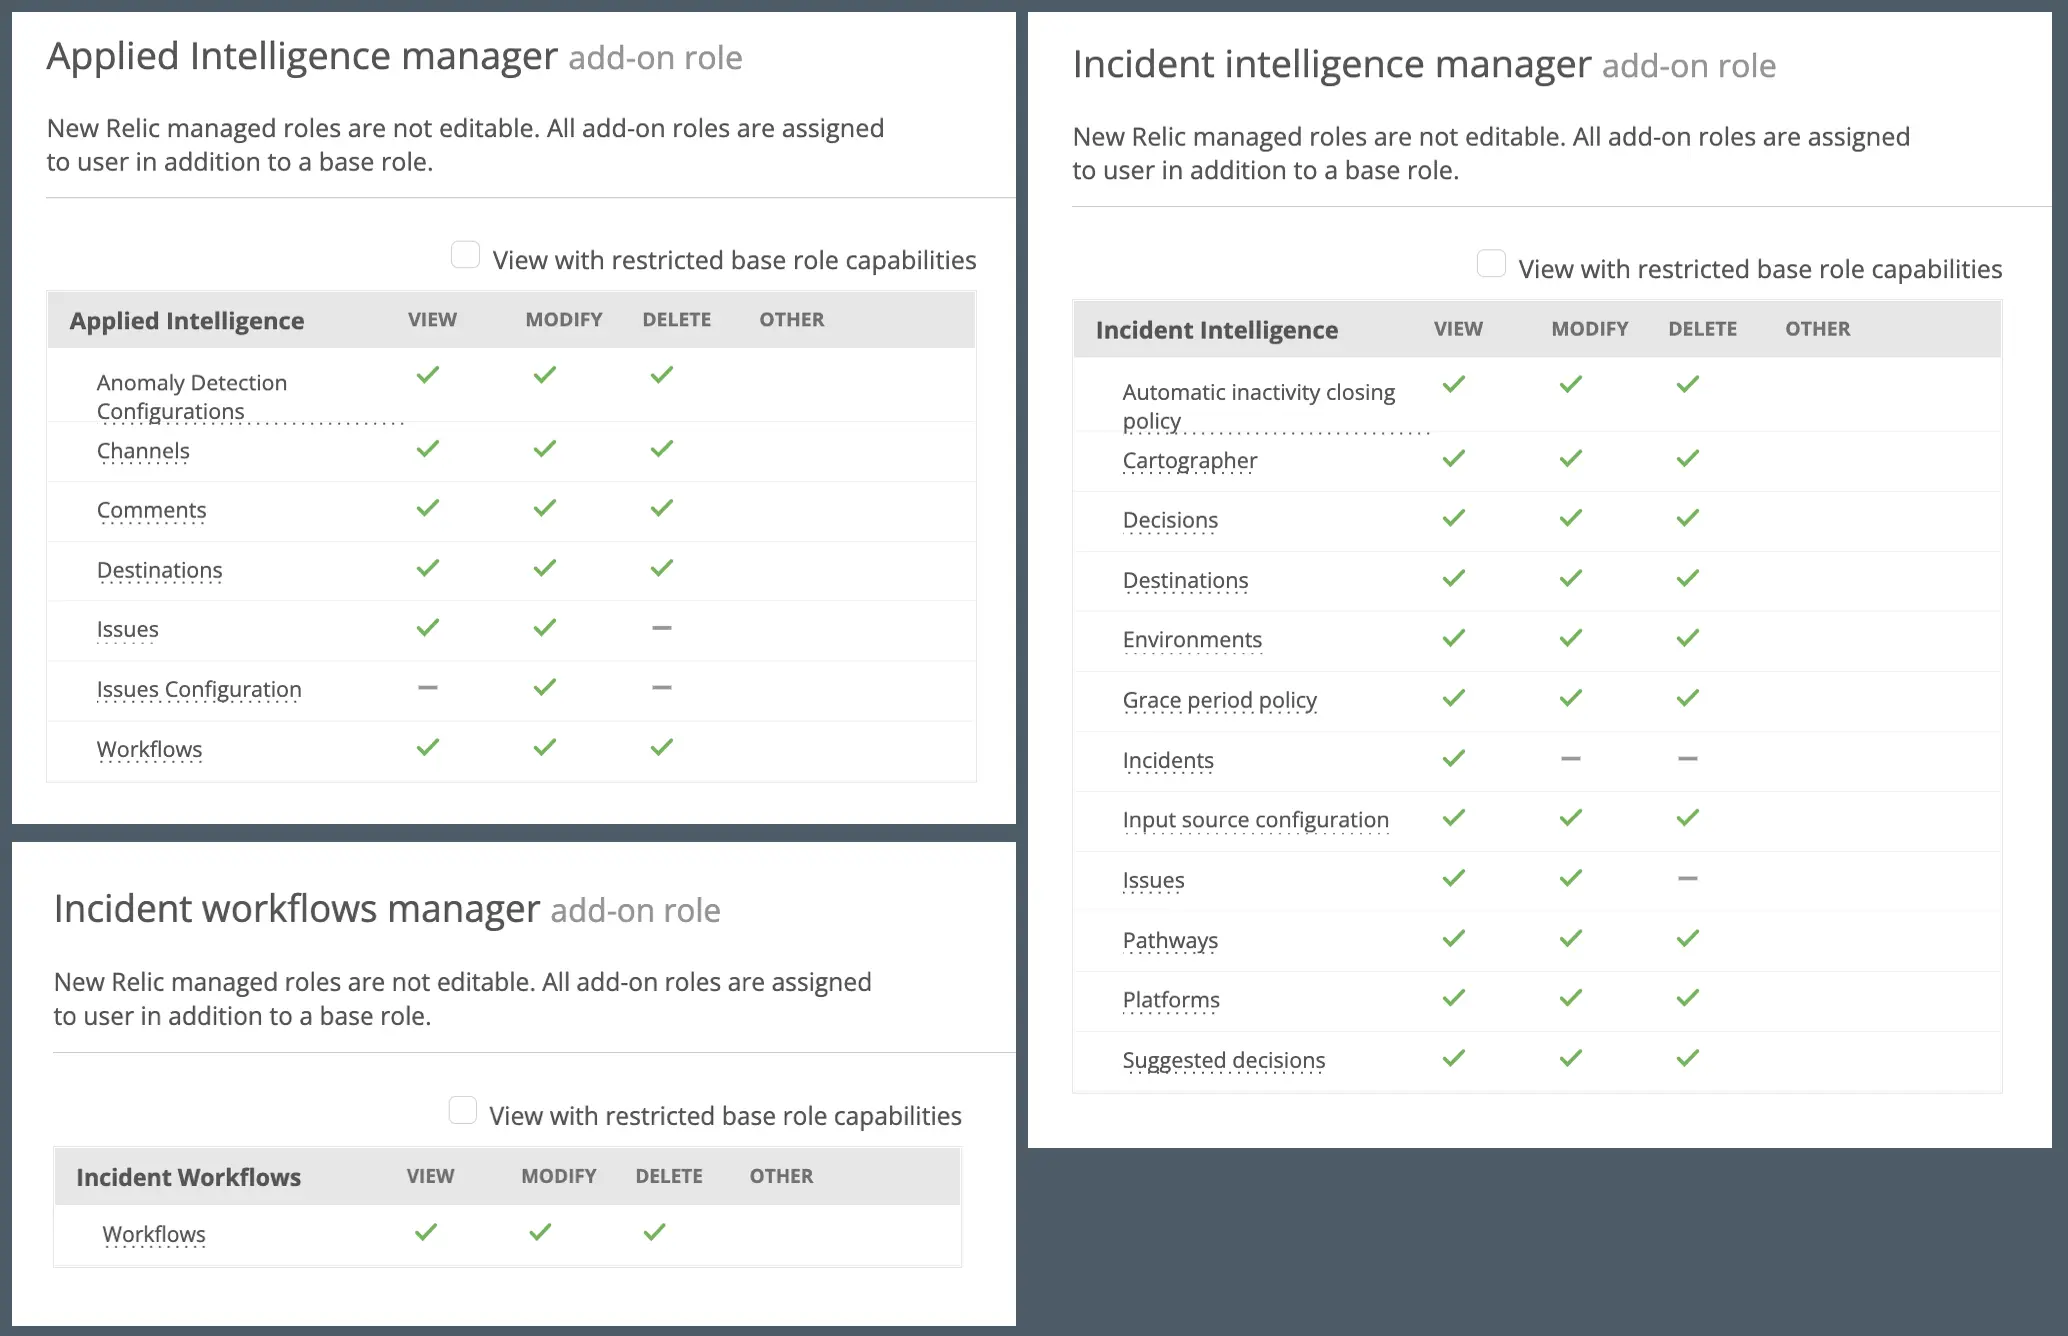 Screenshot of roles related to applied intelligence and incident intelligence